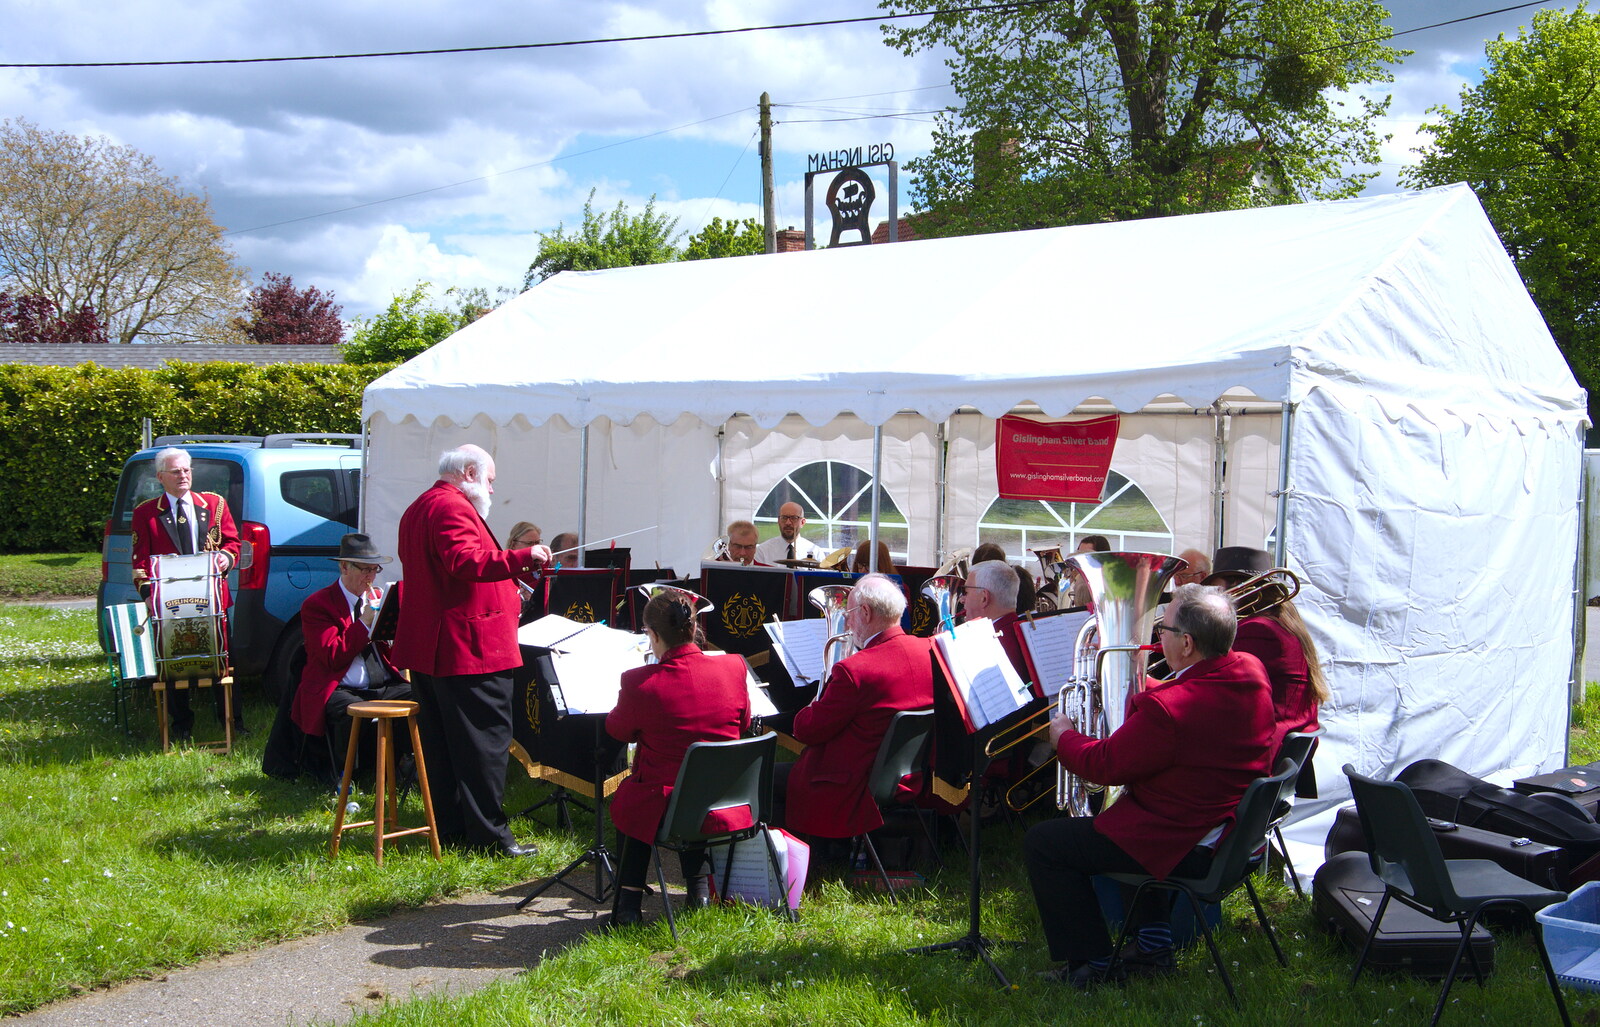 Adrian conducts the band from The Gislingham Silver Band at the Village Hall, Gislingham, Suffolk - 12th May 2019